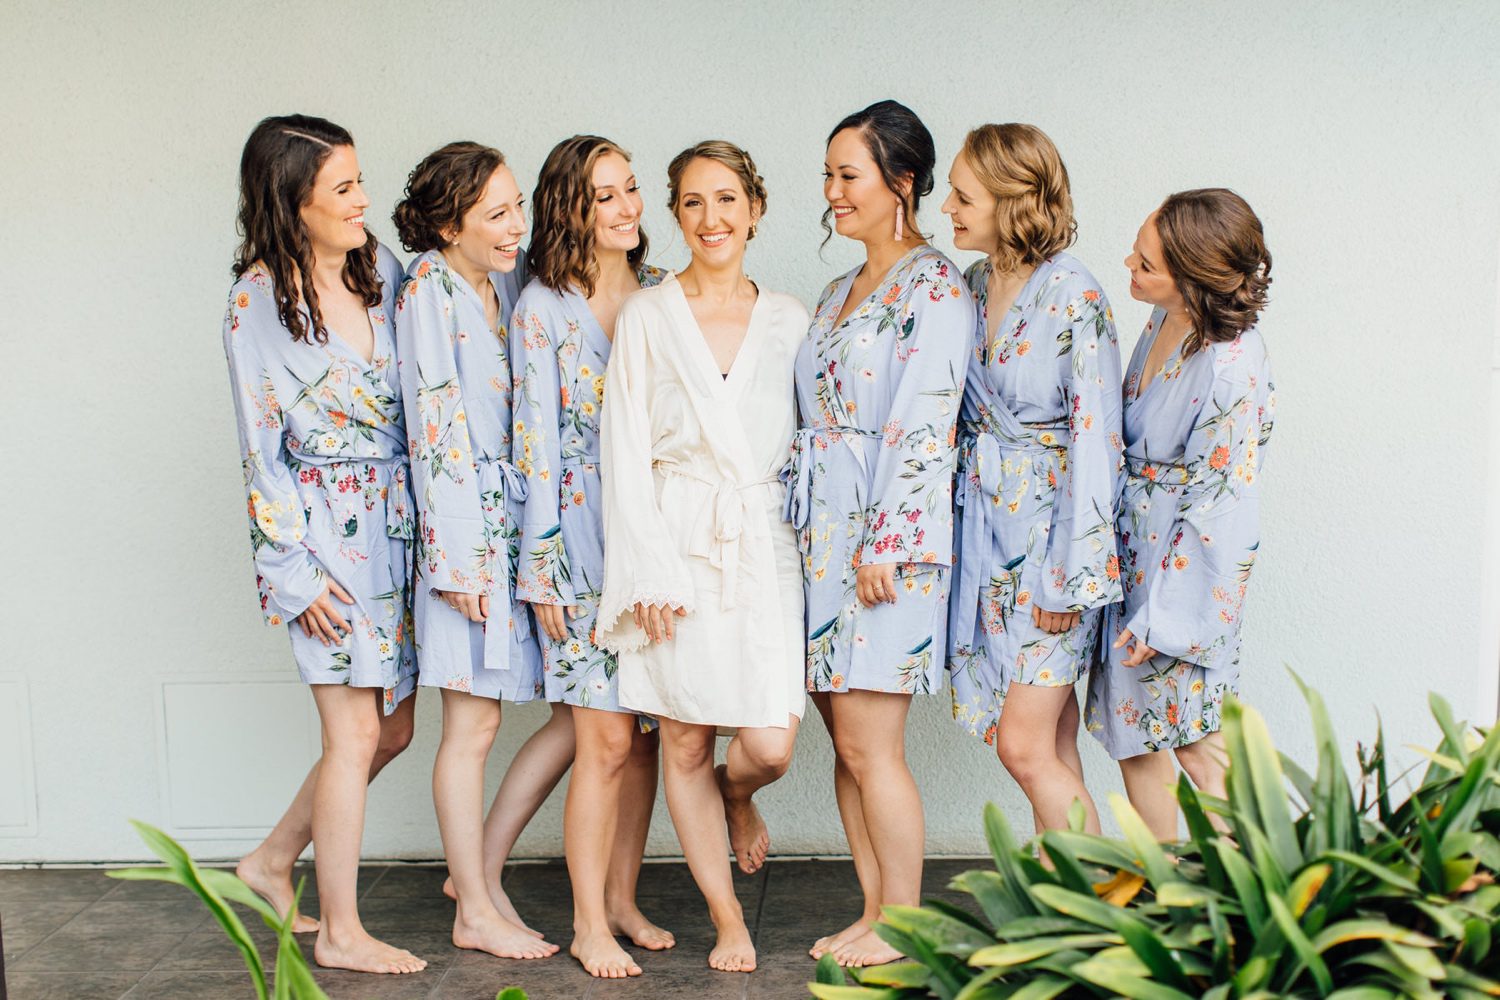 California Bride surrounded by her bridesmaids wearing matching robes.